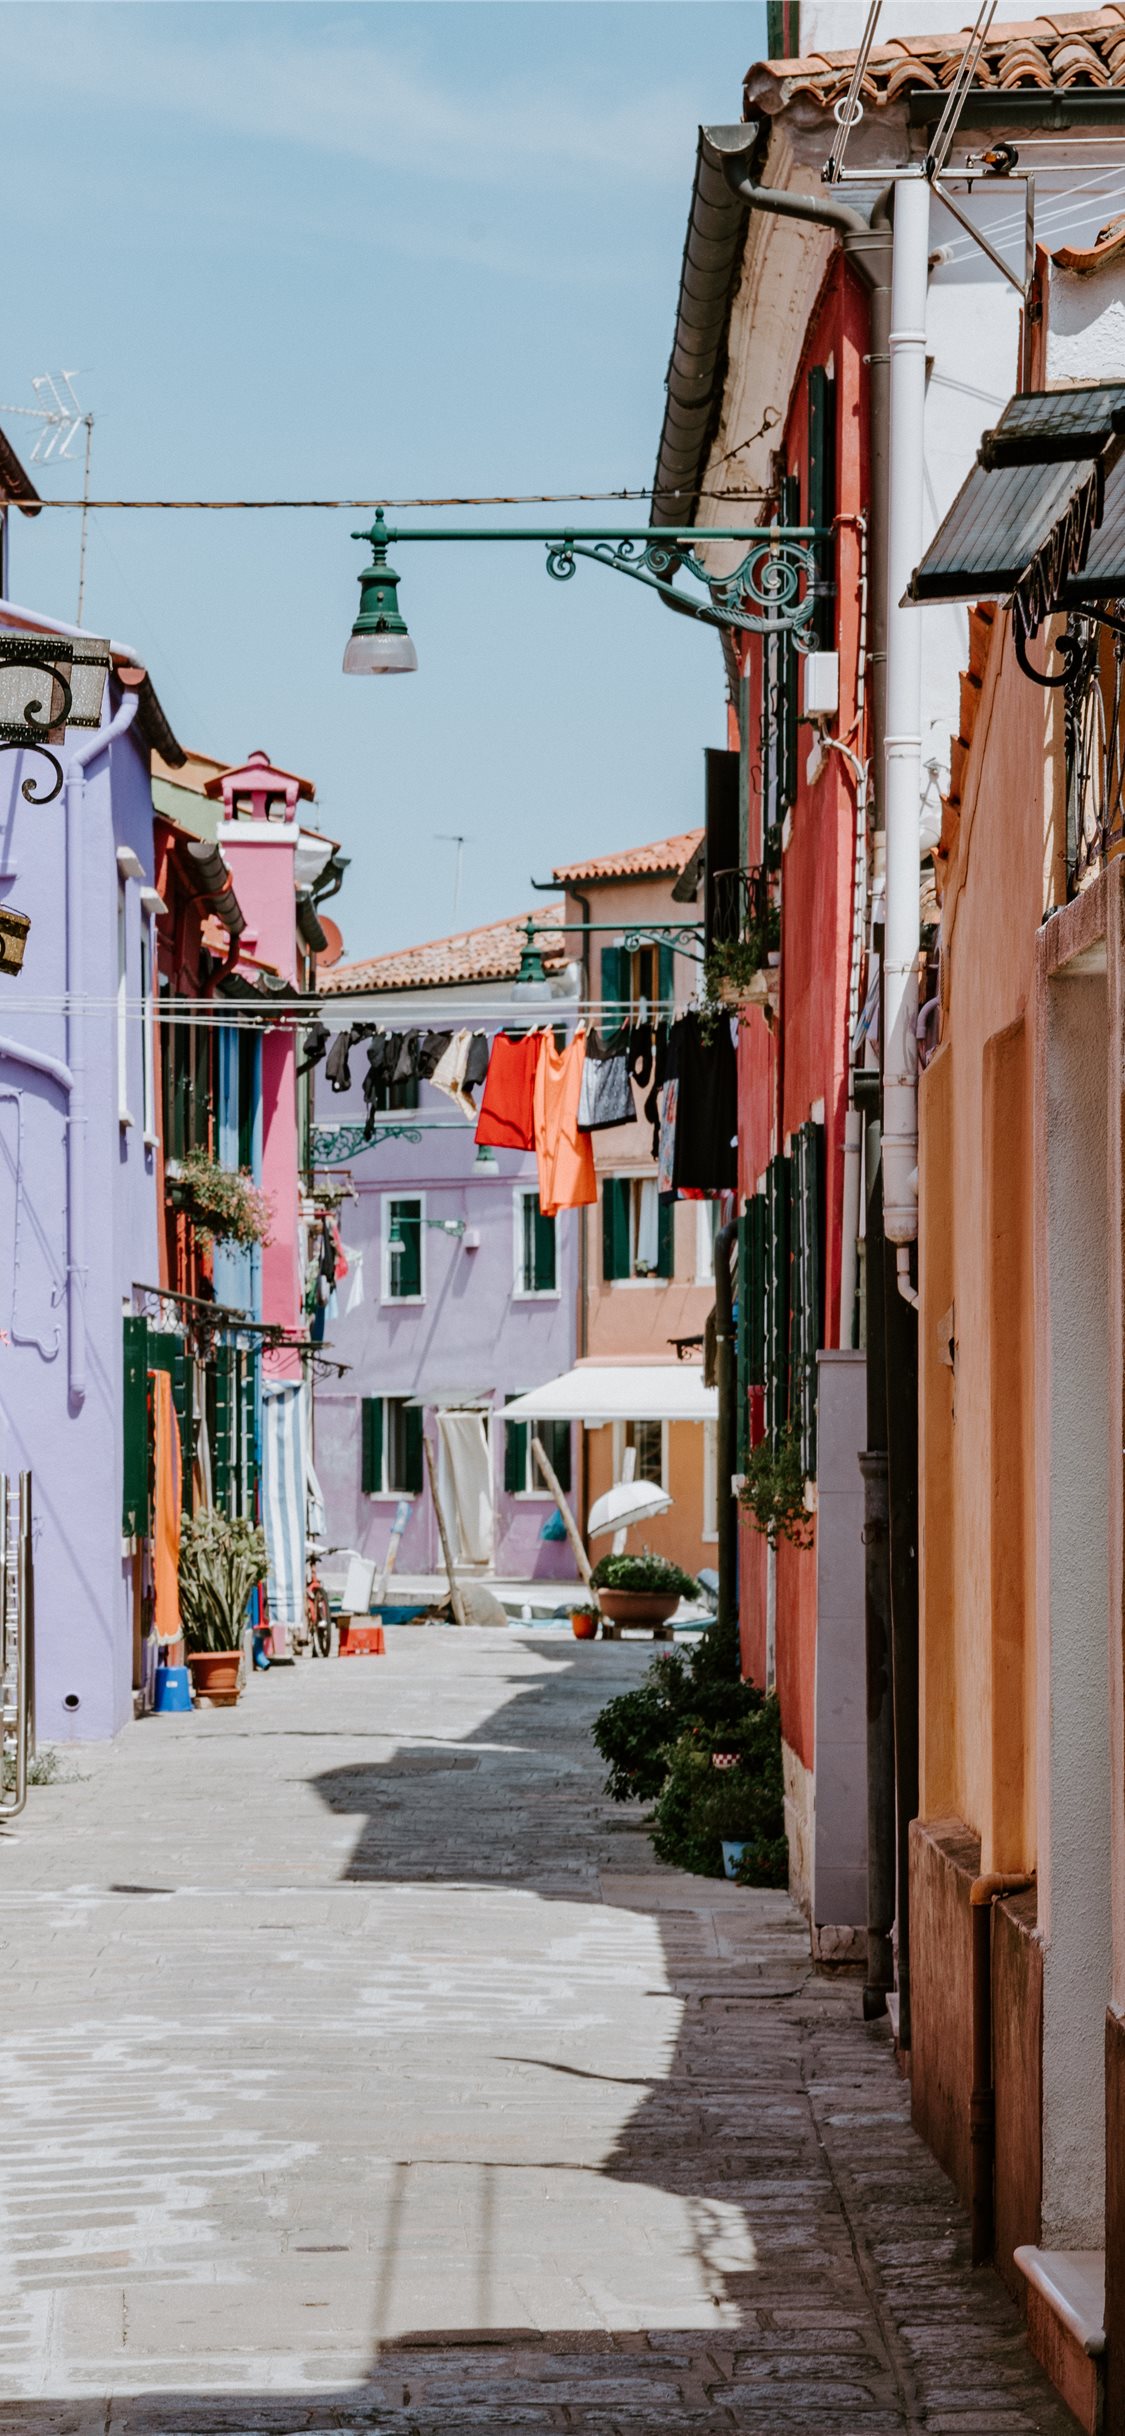 Laundry Drying In Alley Colourful Burano Iphone X Wallpaper - Alley , HD Wallpaper & Backgrounds